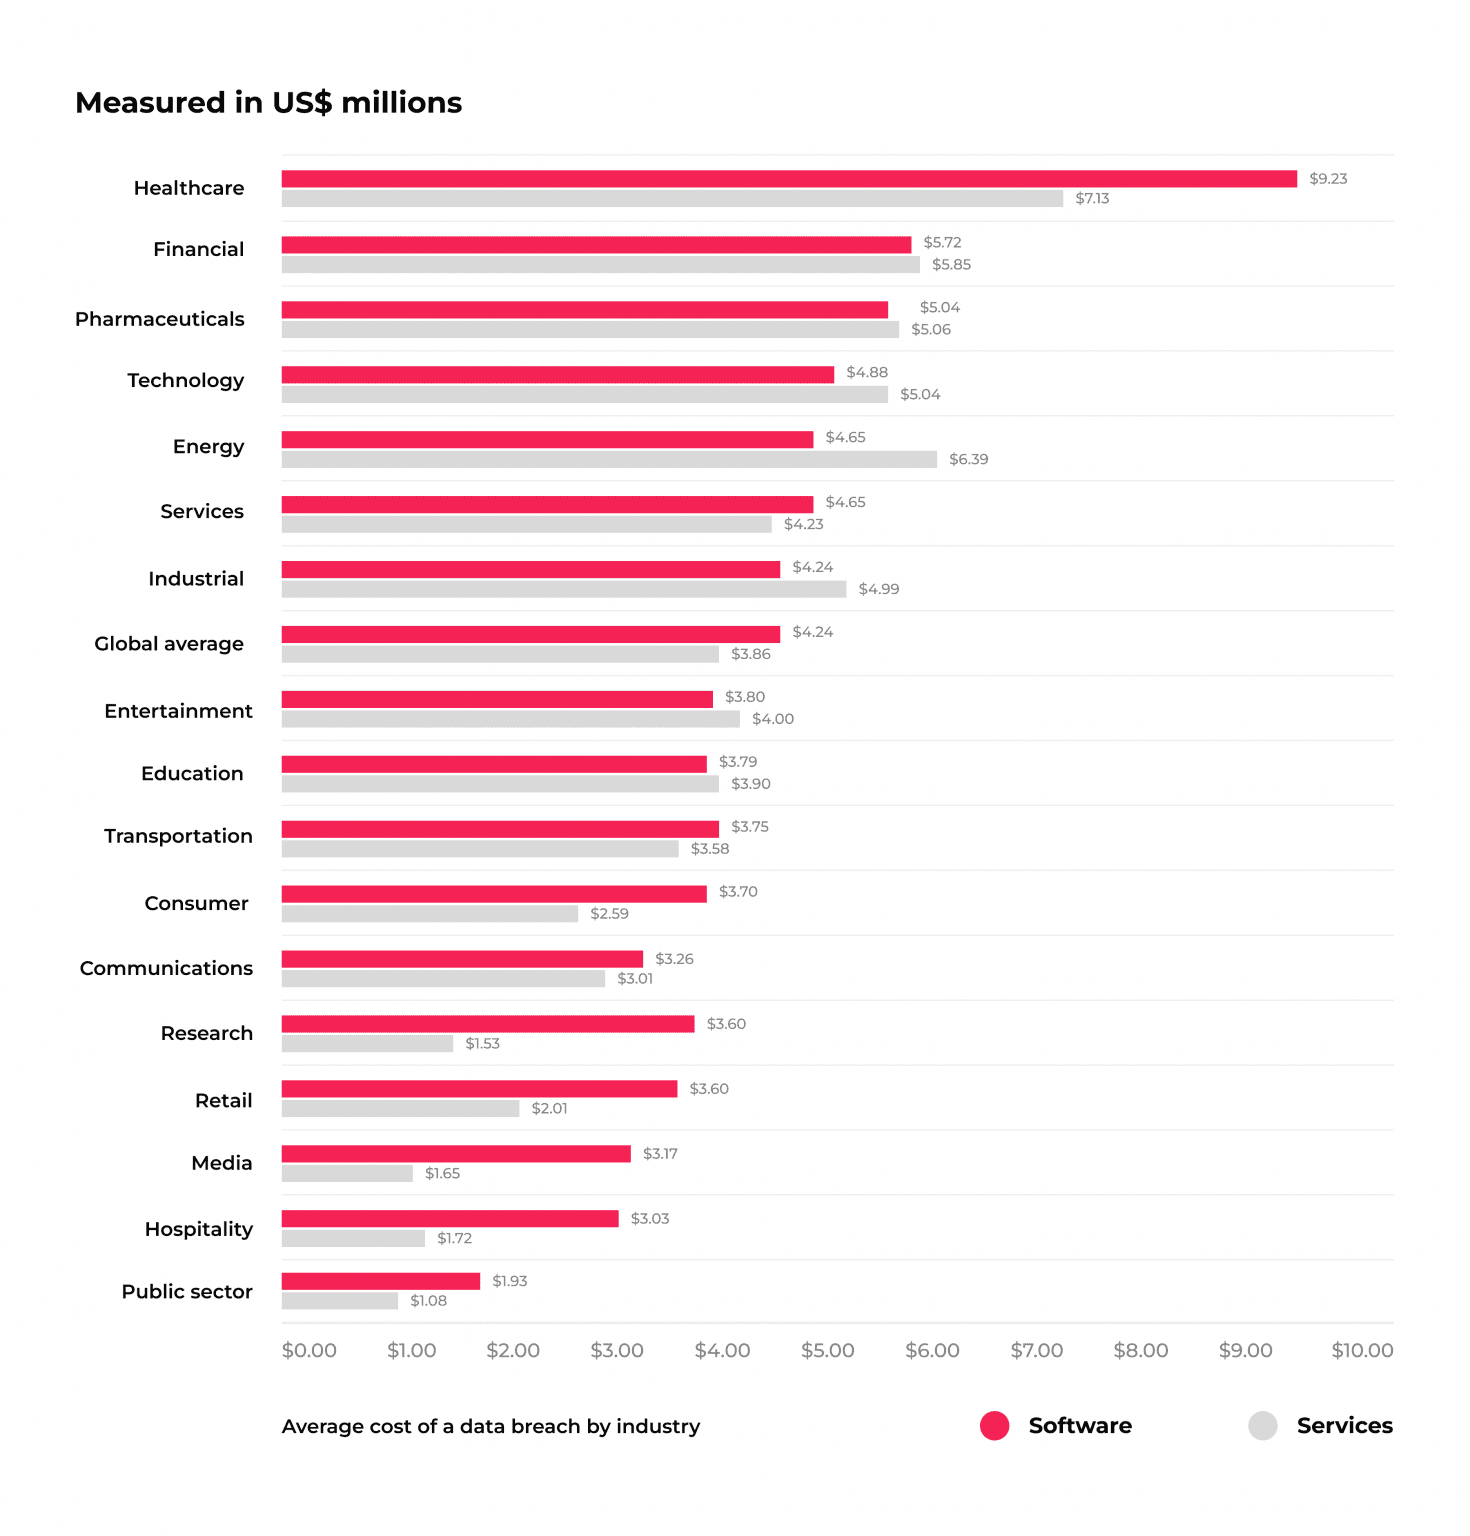 The average cost of a data breach by industry, in USD